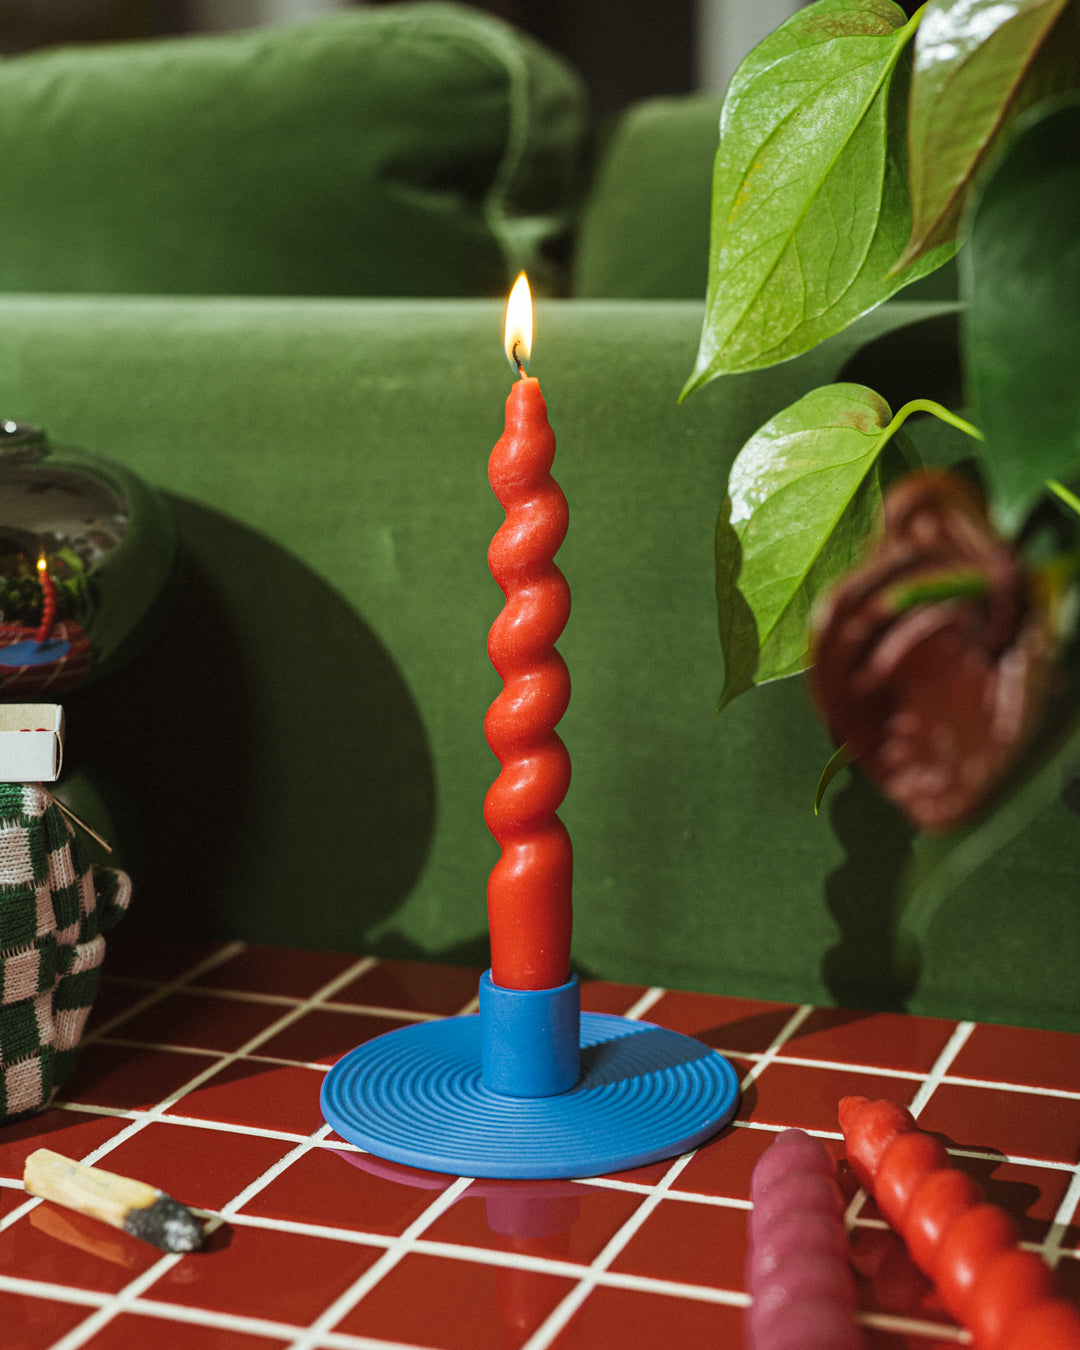 'The Top' Spiral Candles